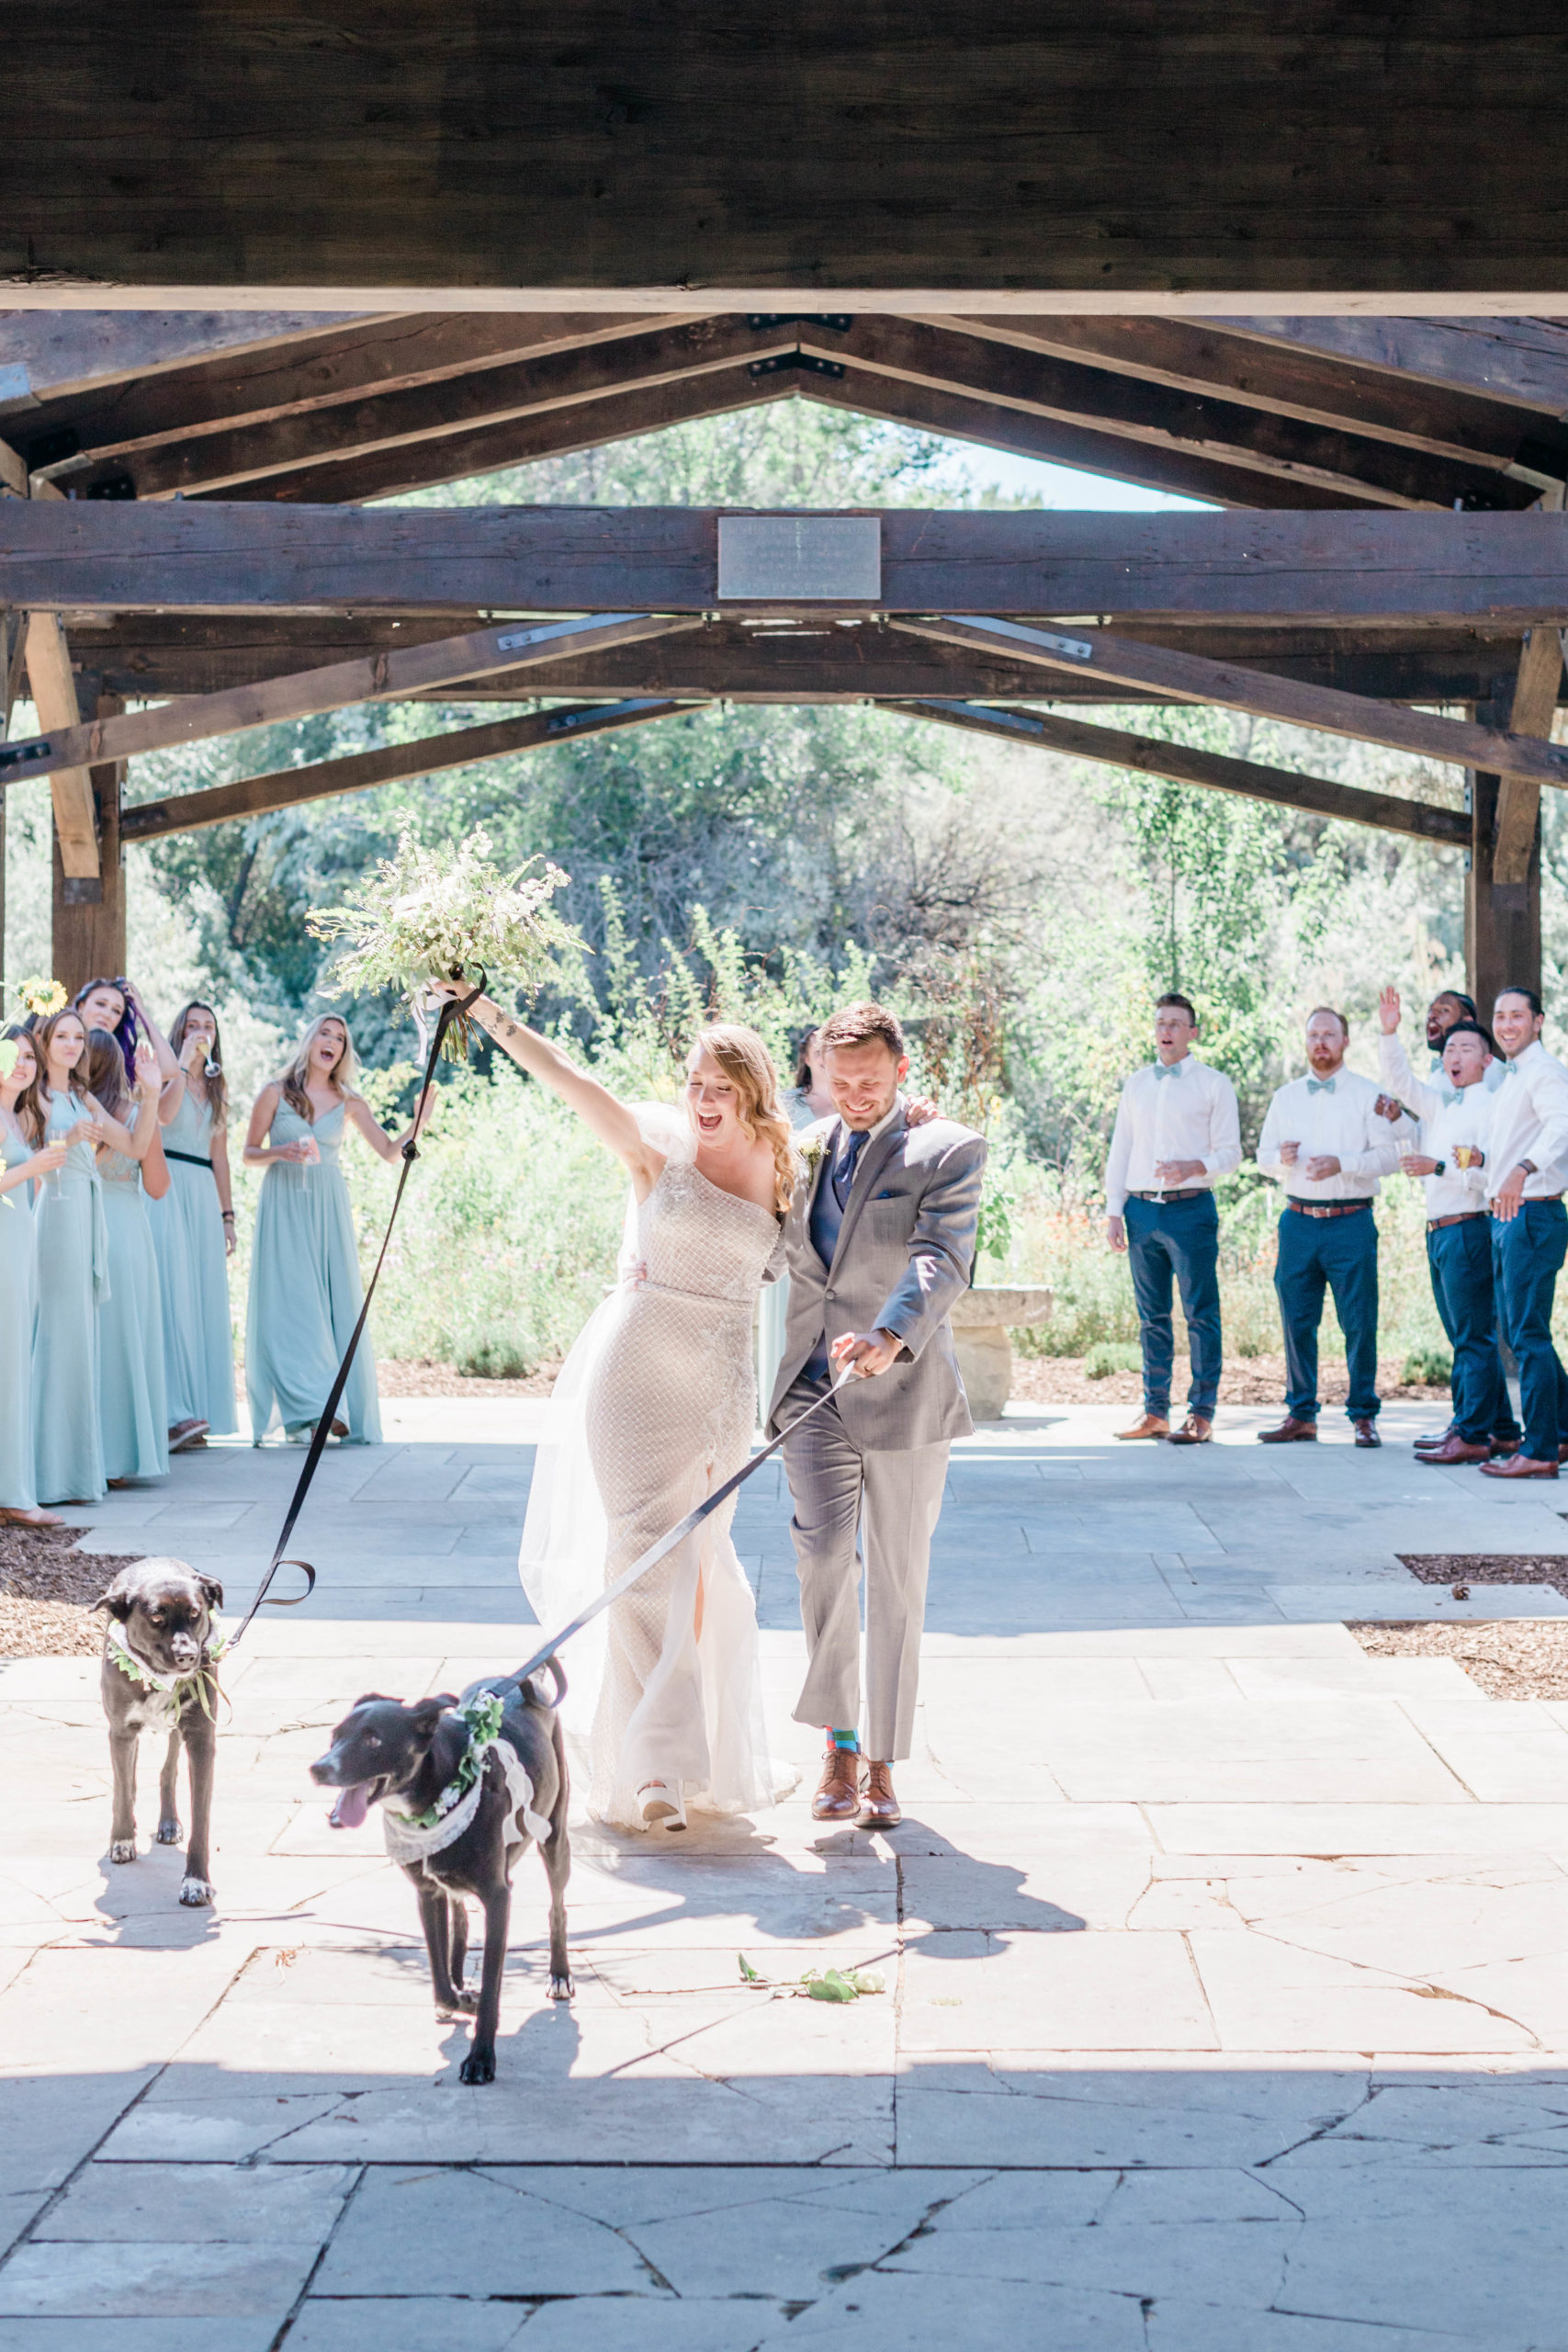 wedding exit with bride and groom walking their dogs back down the aisle after their Boise wedding ceremony